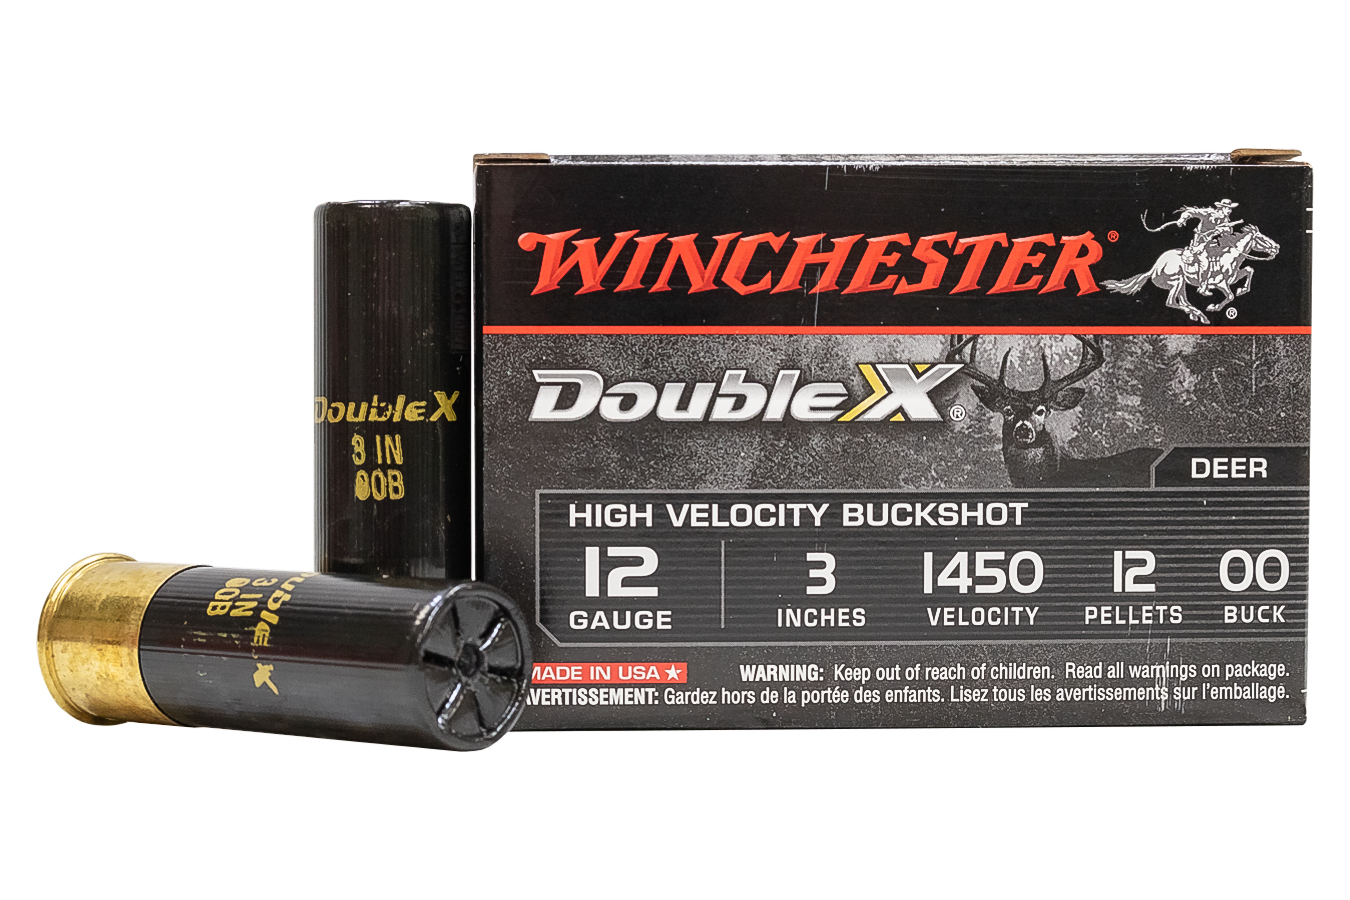 WINCHESTER AMMO 12 GA 3 IN 12 PELLETS HV PLATED BUFFERED SHOT DOUBLE X